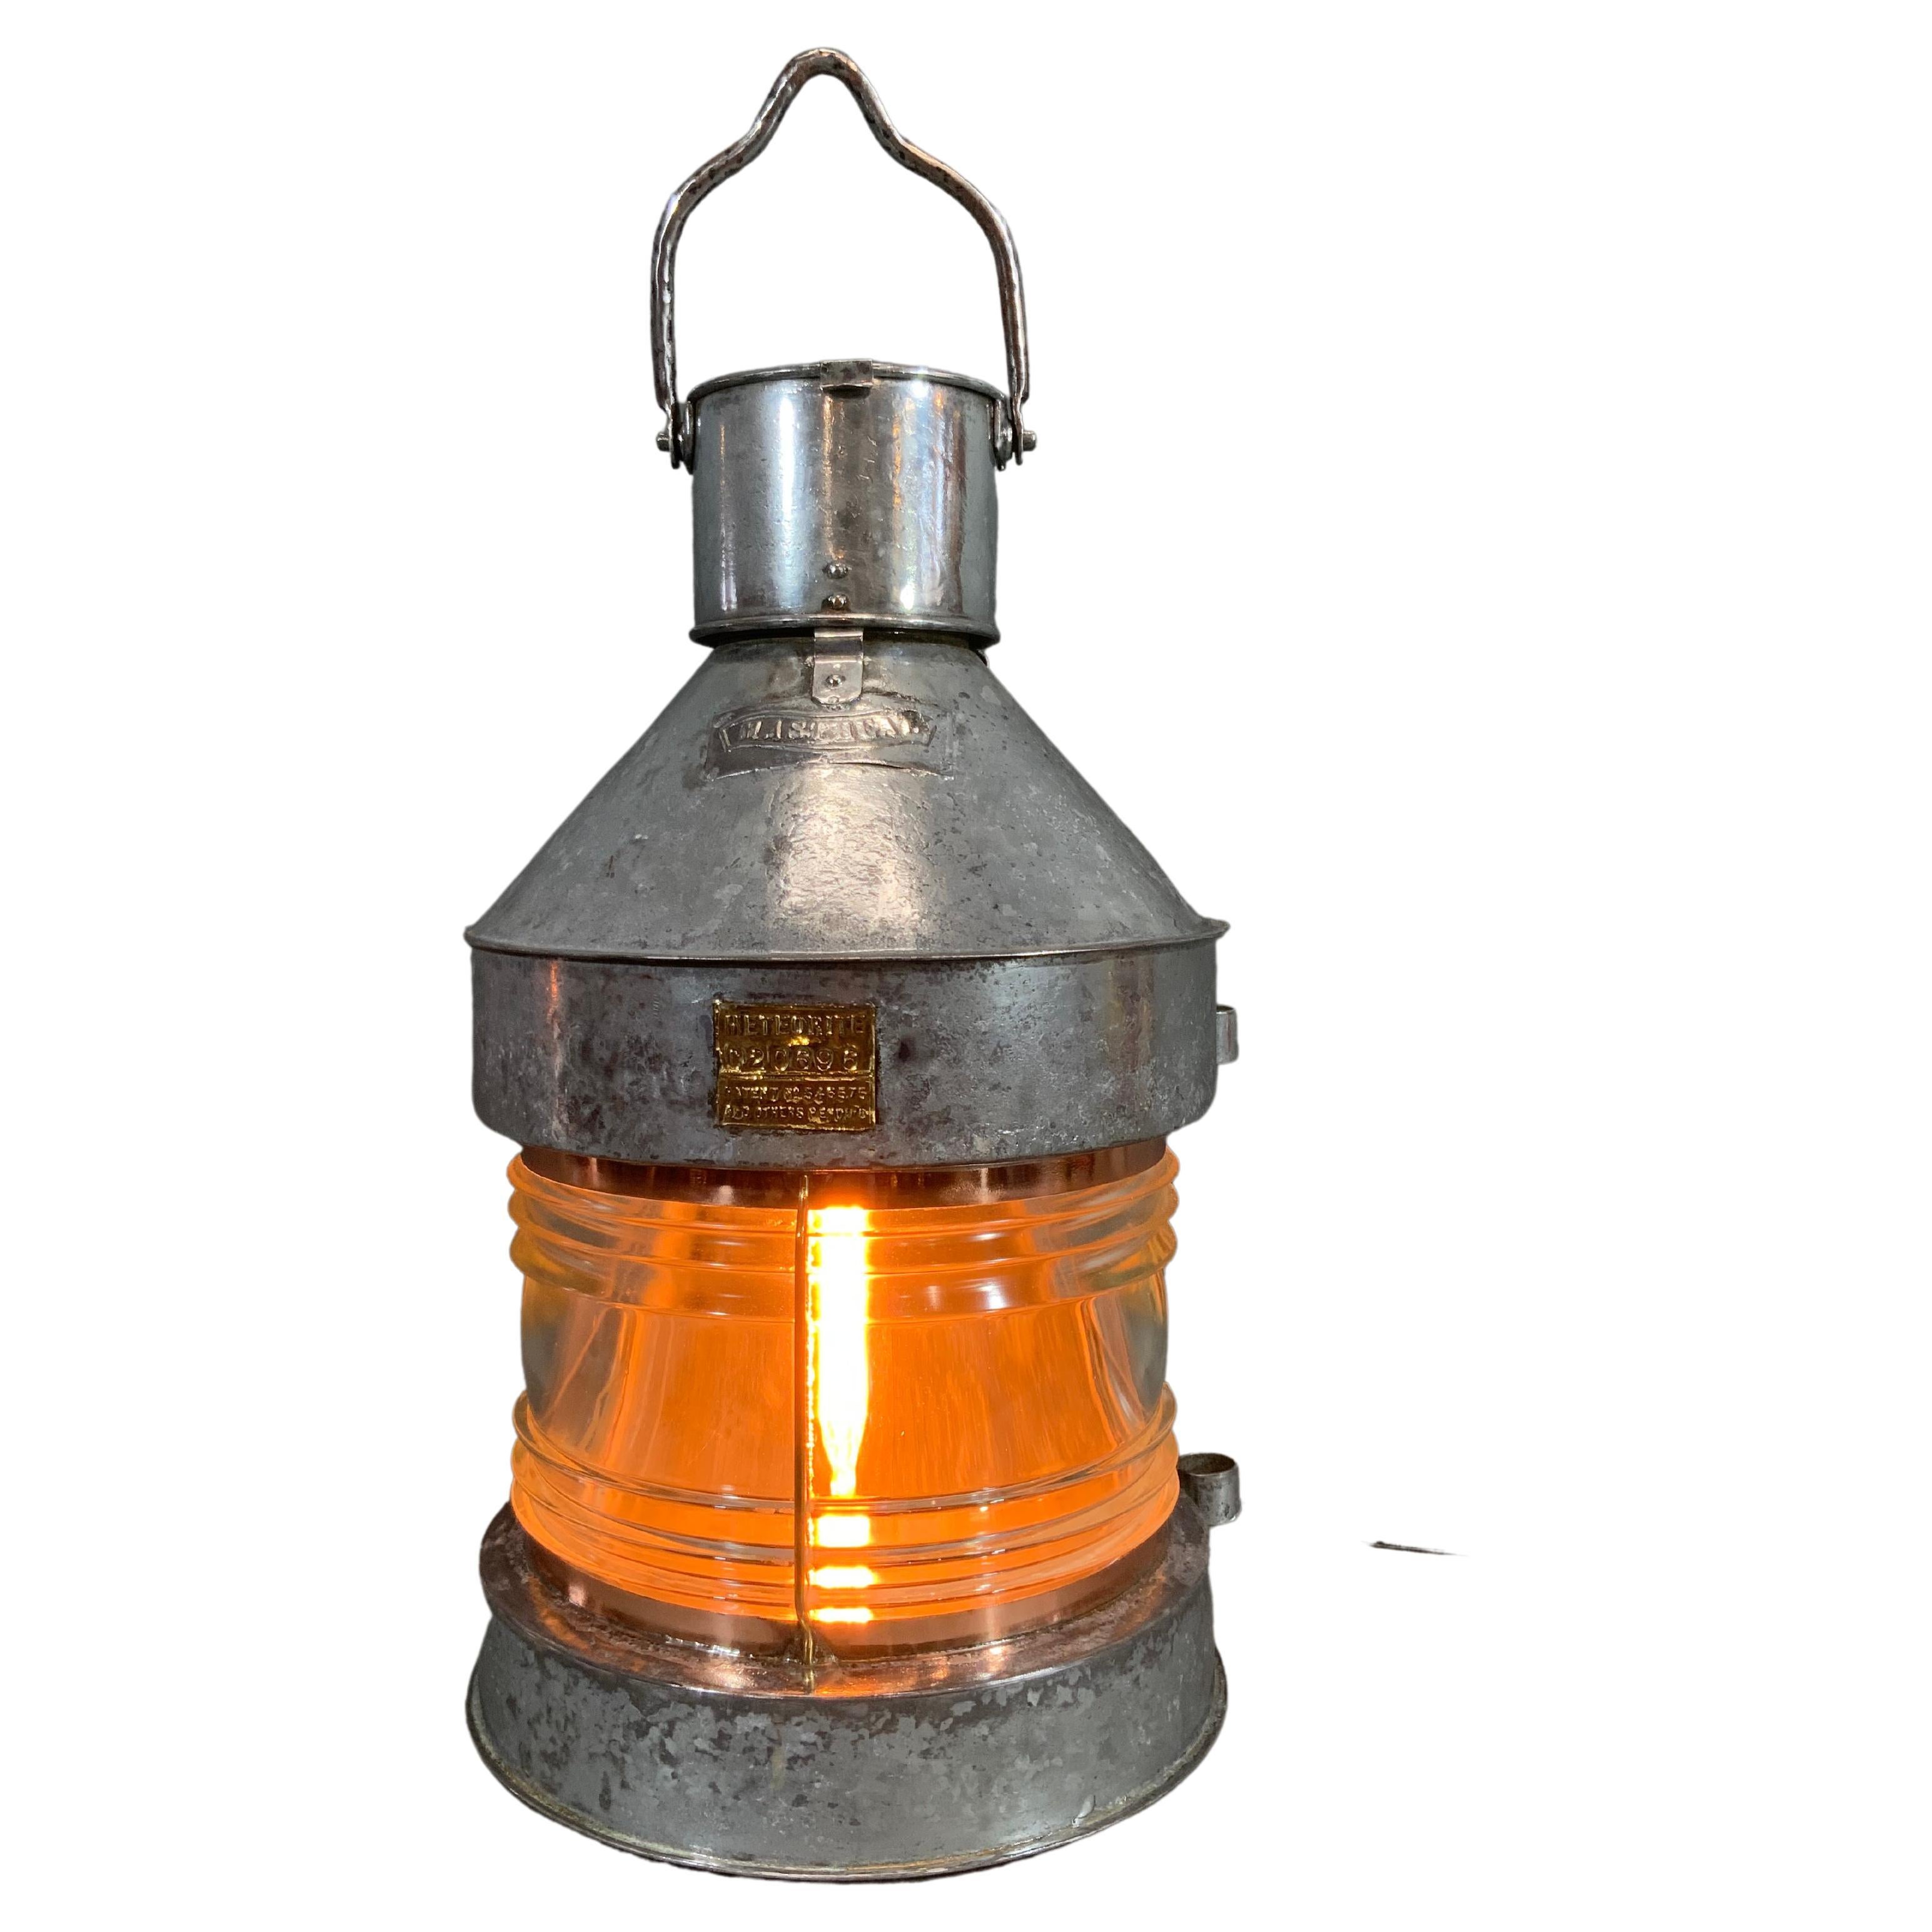 Polished Steel Ship's Masthead Lantern with Fresnel Lens by Meteorite "C20696" For Sale